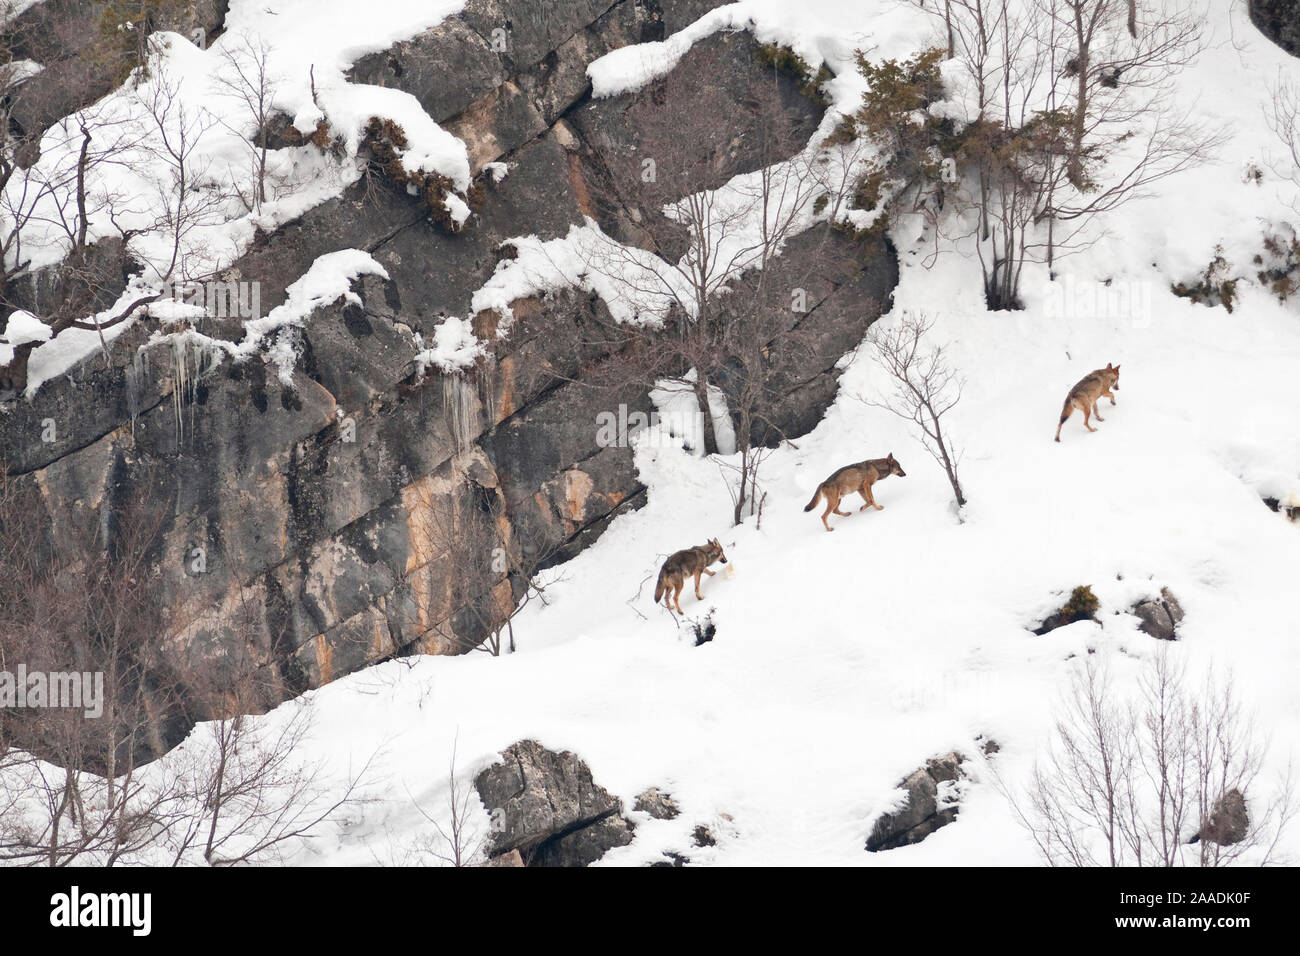 Wild Apennine wolf (Canis lupus italicus) adults moving on snowy mountain slope. Italian endemic subspecies. Central Apennines, Abruzzo, Italy. February.. Stock Photo